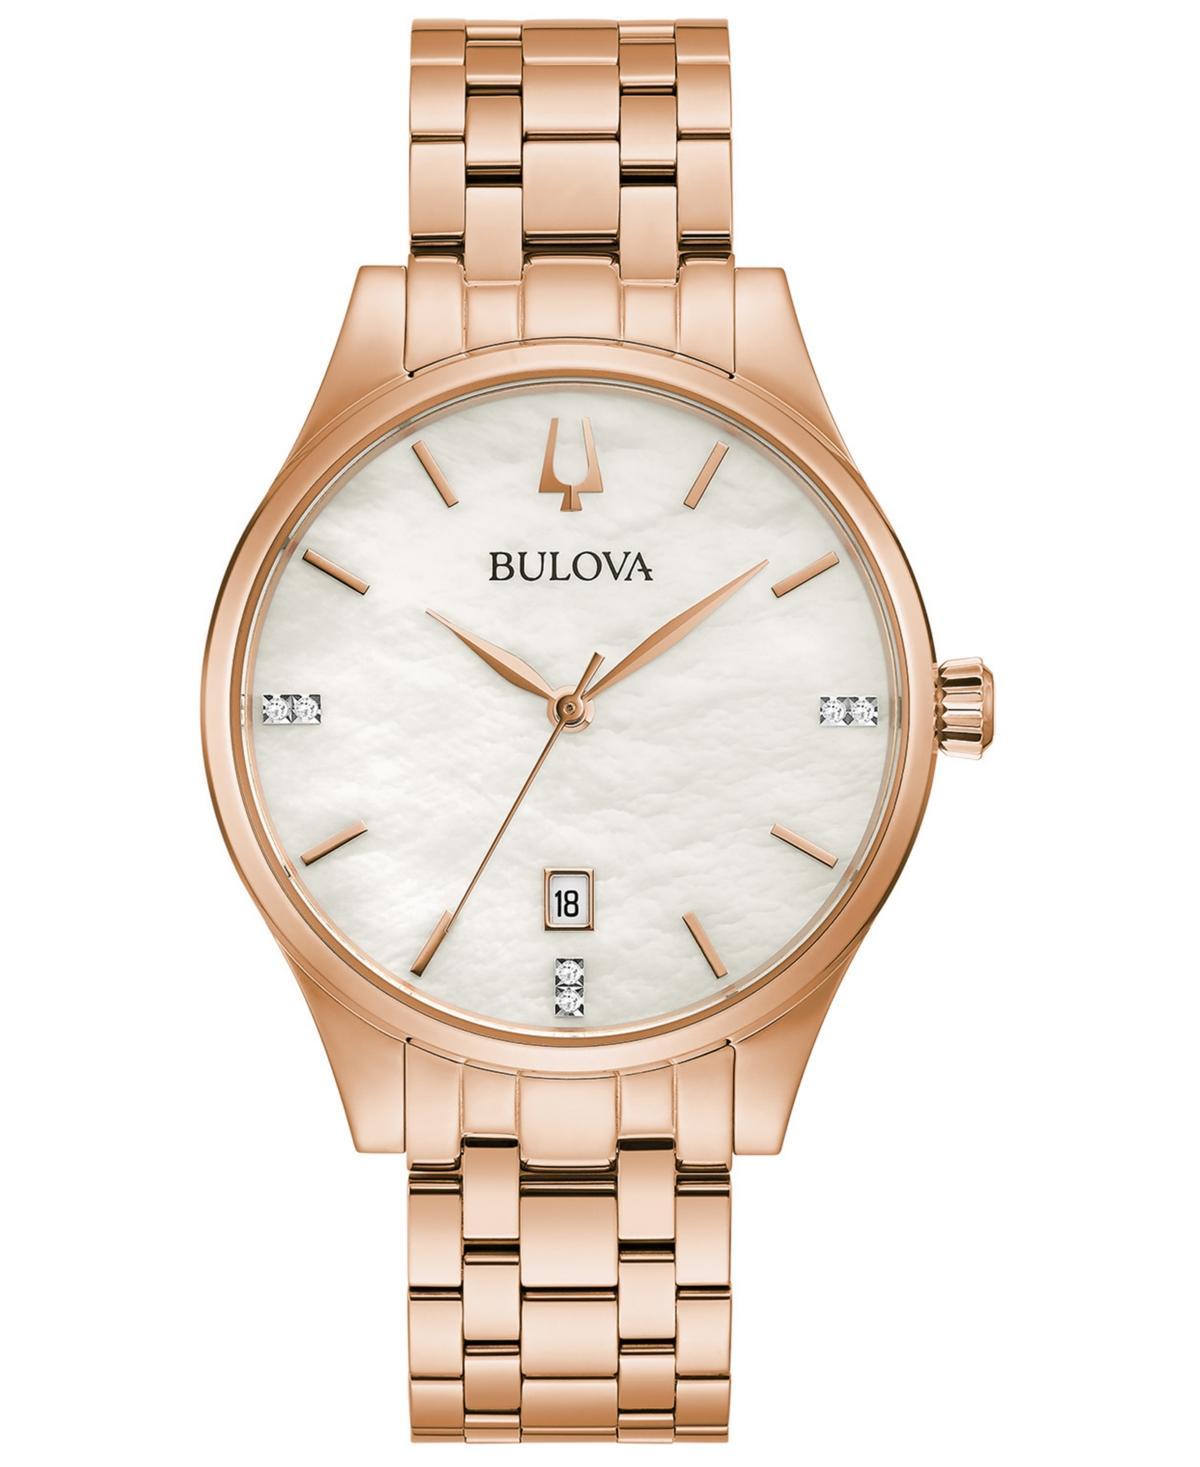 Bulova Classic Womens Rose Goldtone Stainless Steel Bracelet Watch 97p152, One Size Product Image